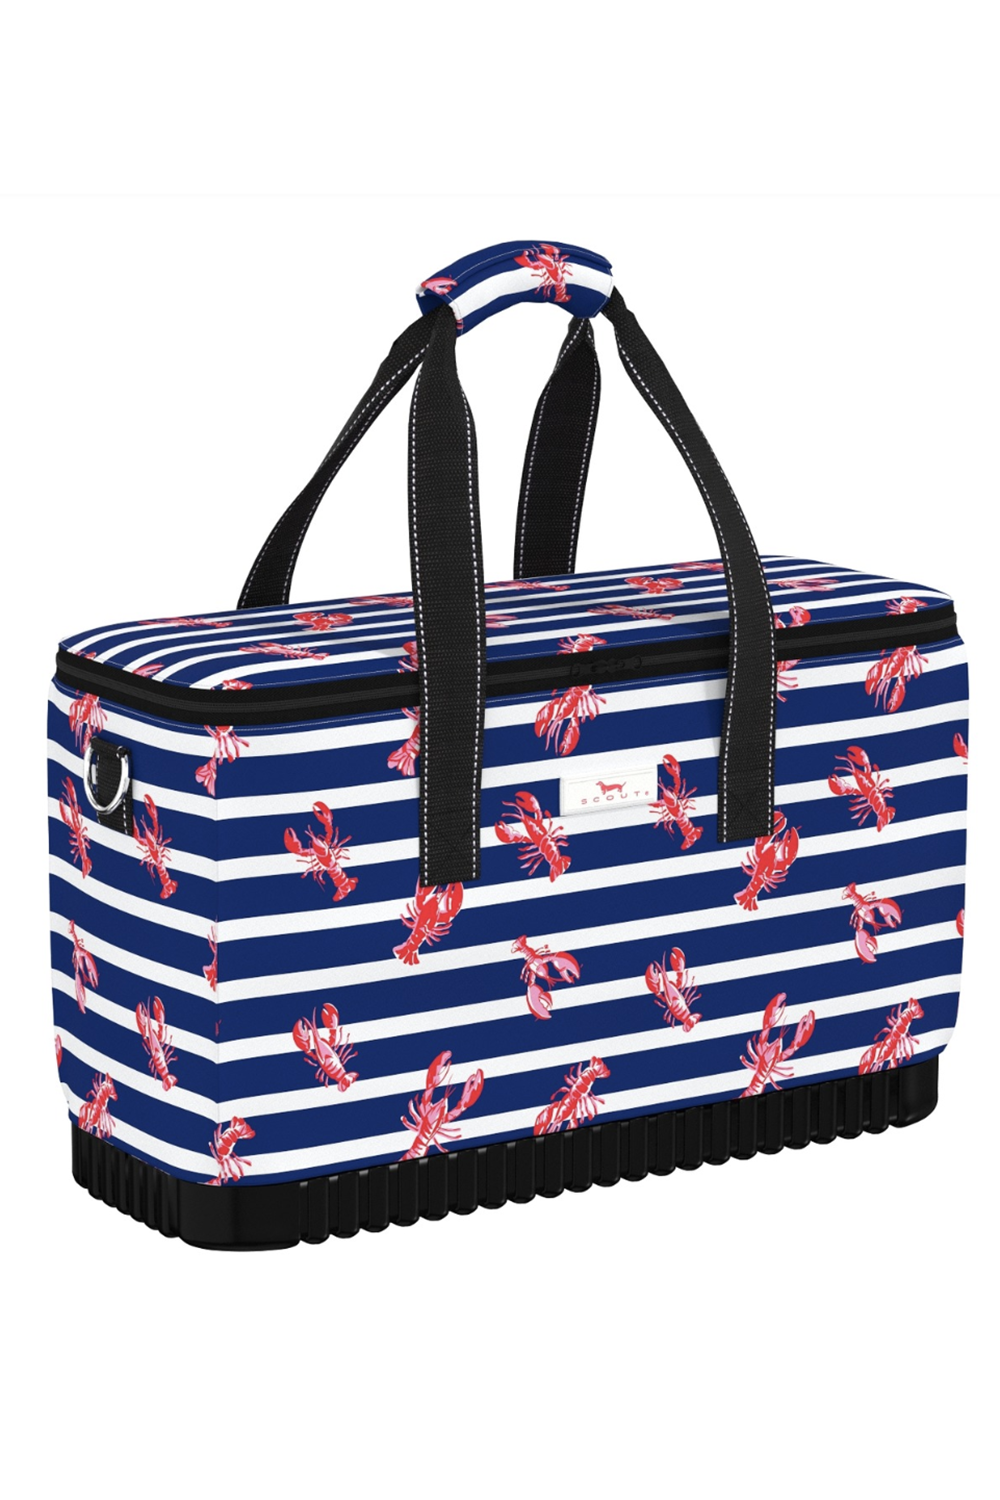 Cool Horizons Large Cooler - "Catch of the Day" SUM24